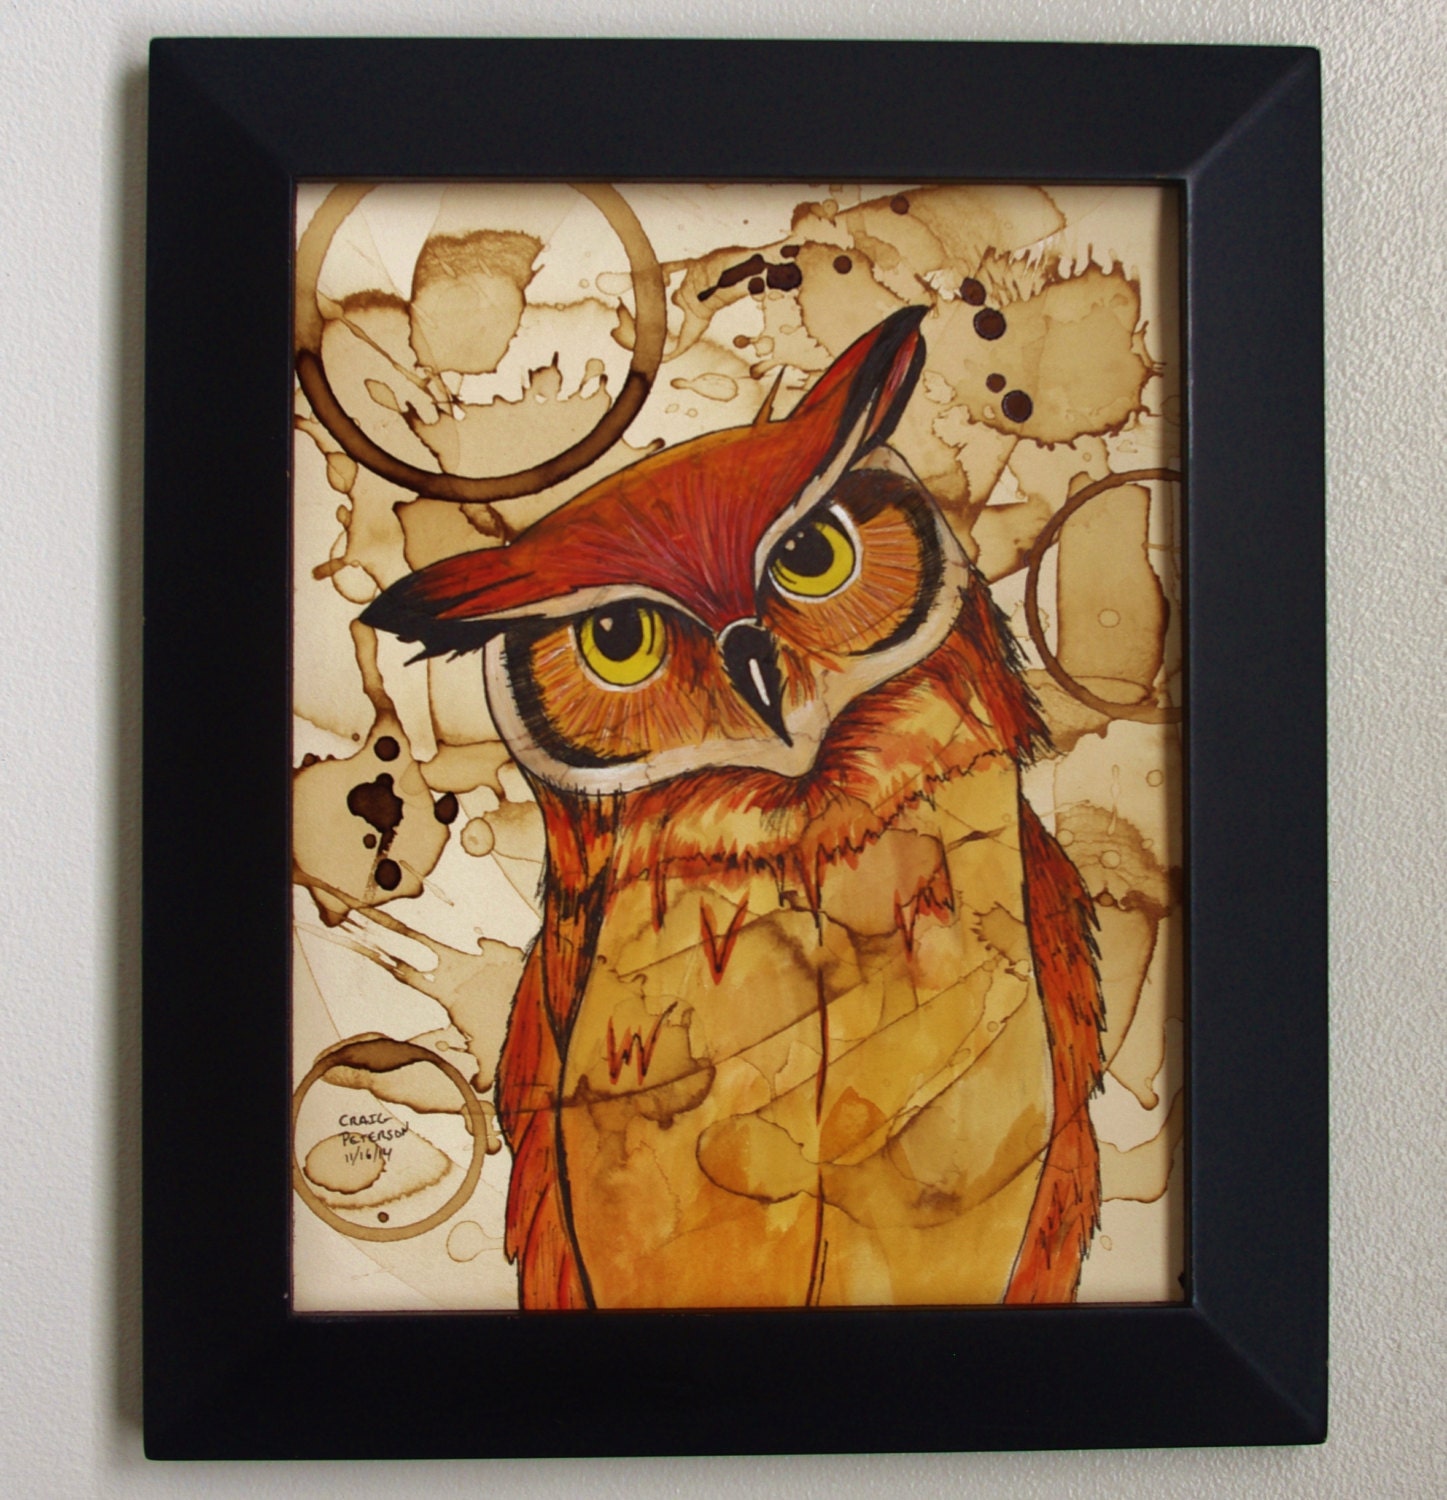 Coffee Art Orange Owl Painted With Watercolor And Pen And Ink